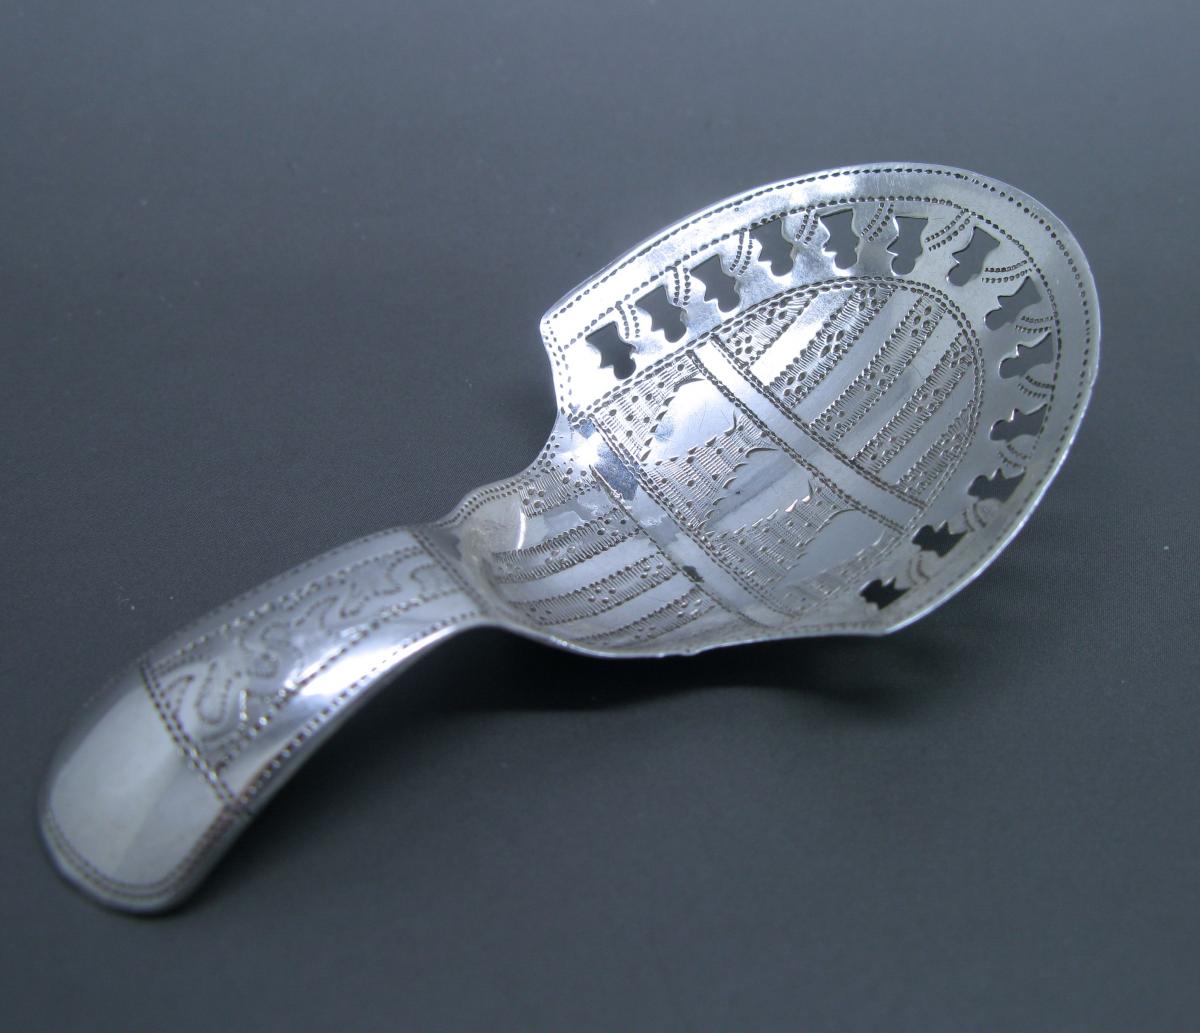 A George III Antique Sterling Silver Caddy Spoon Made by Joseph Taylor 1811